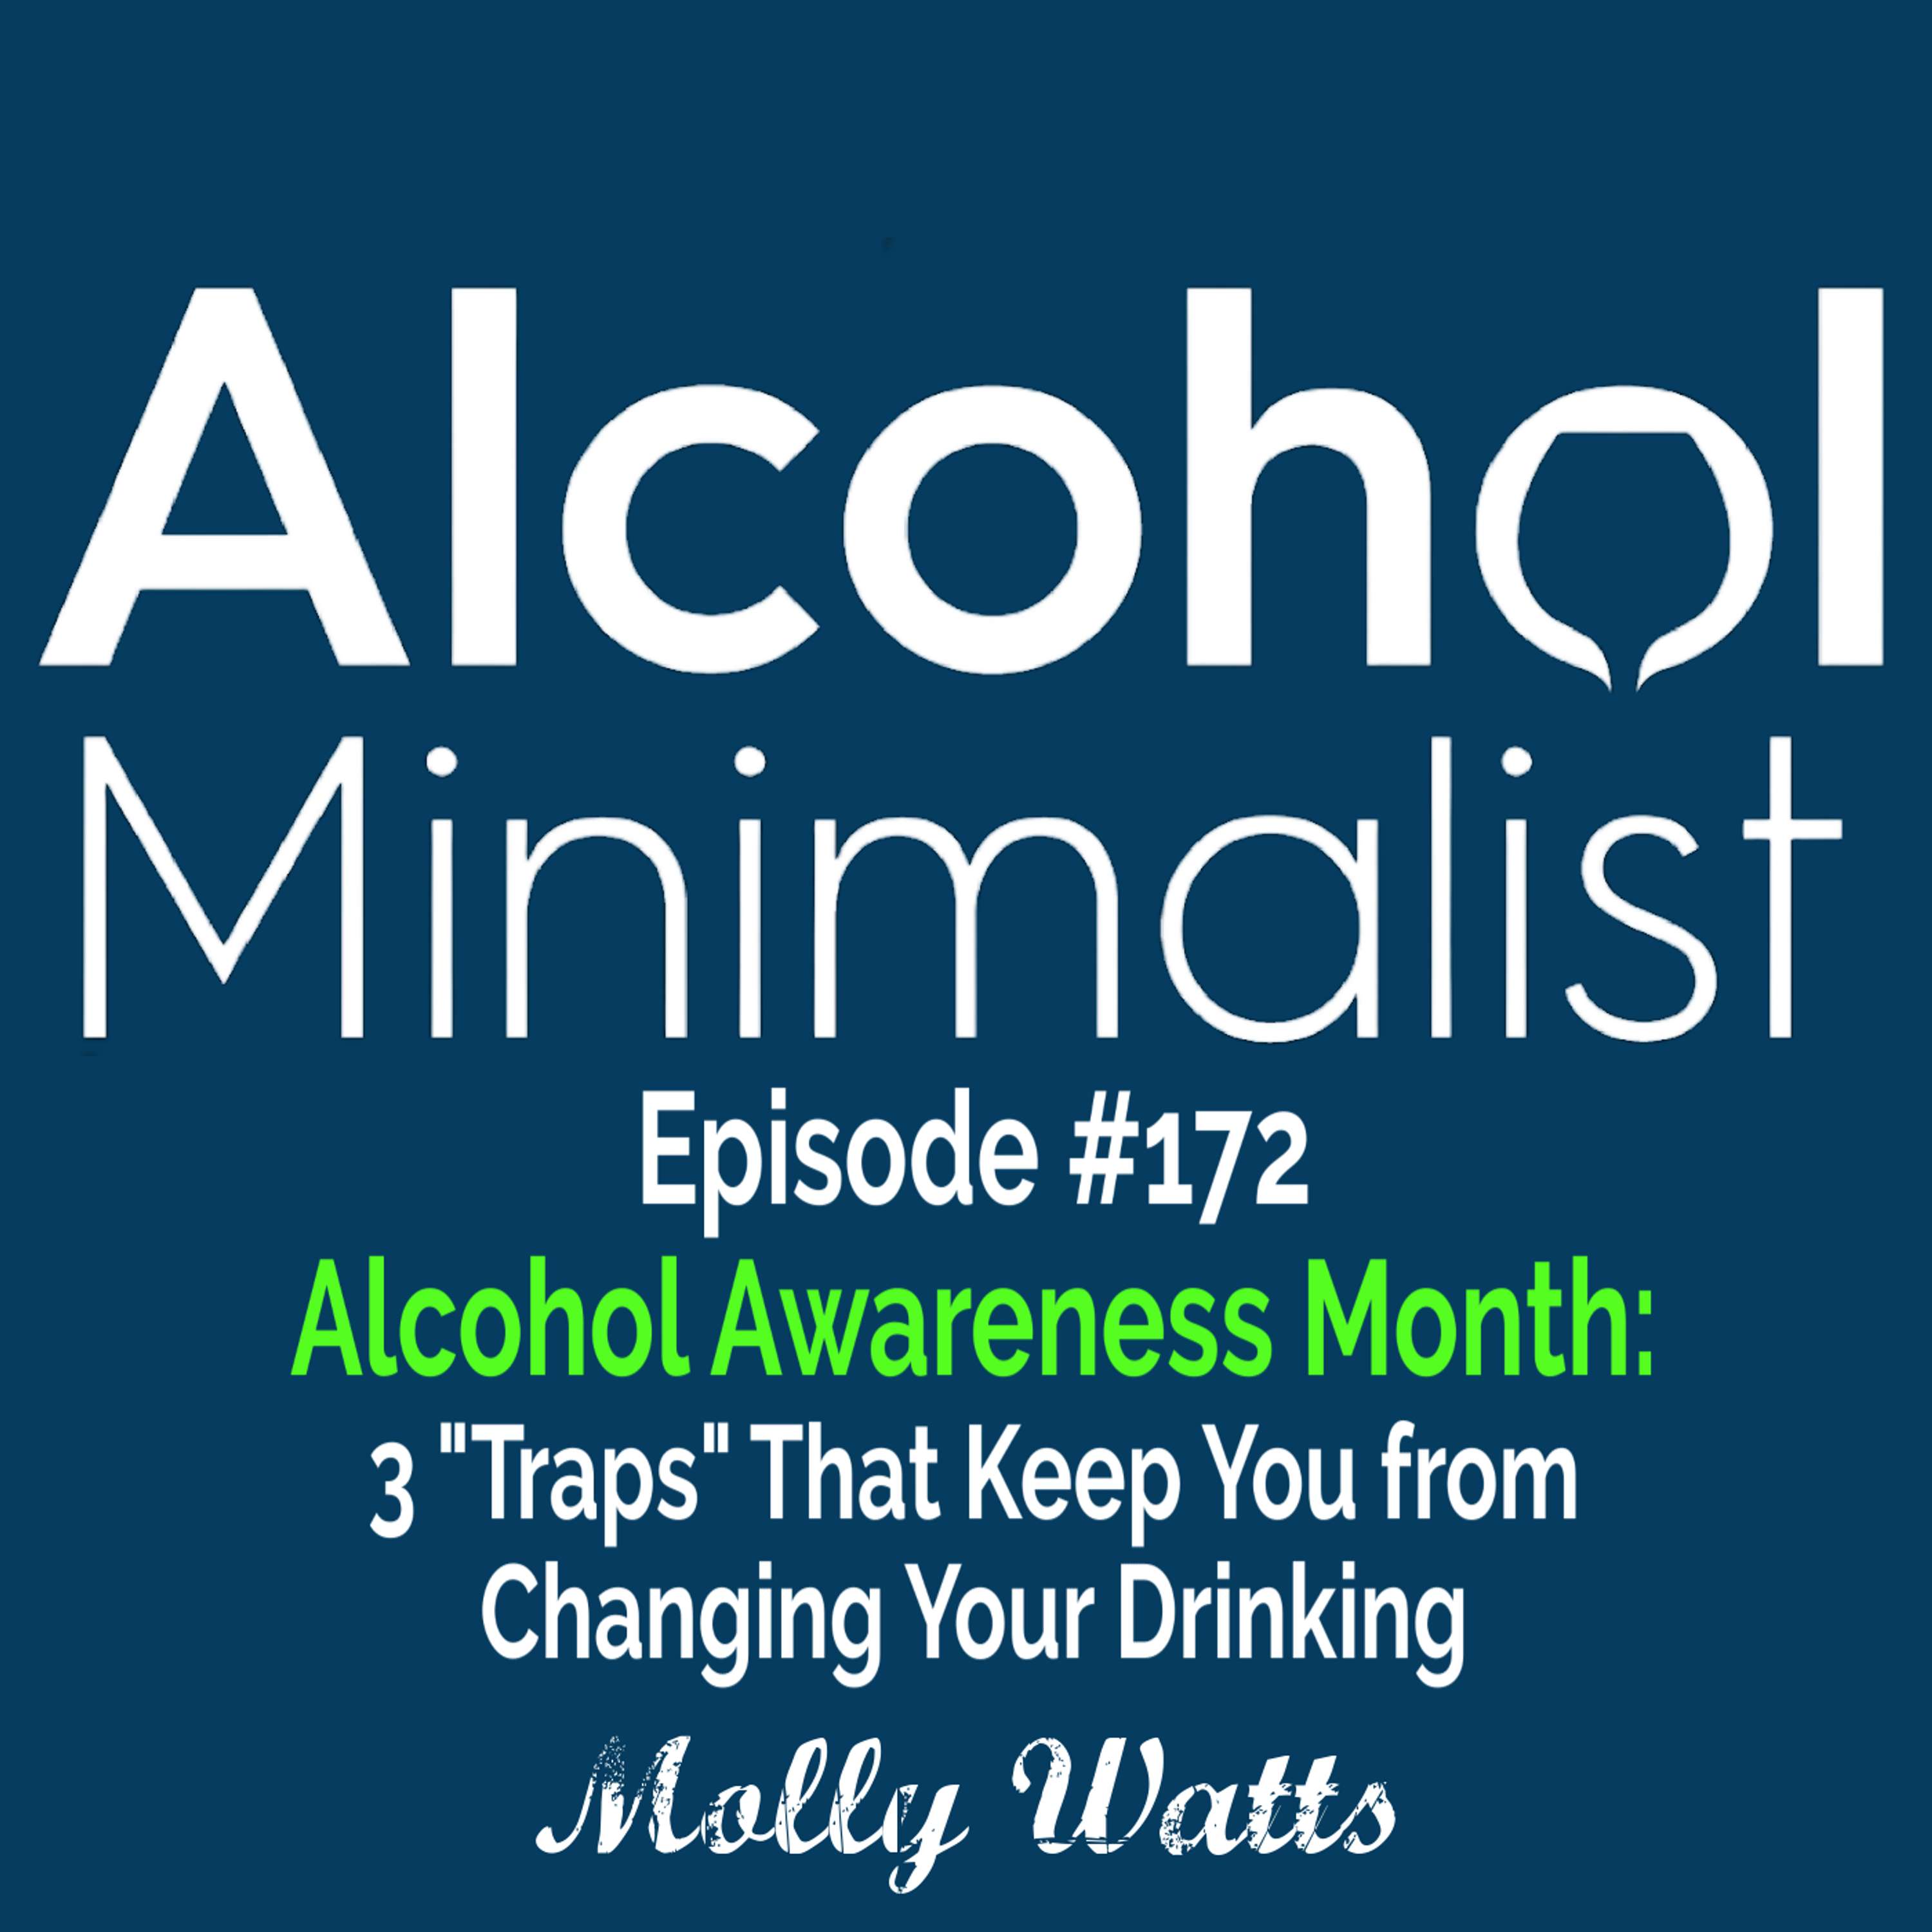 Alcohol Awareness Month: 3 "Traps" That Keep You from Changing Your Drinking